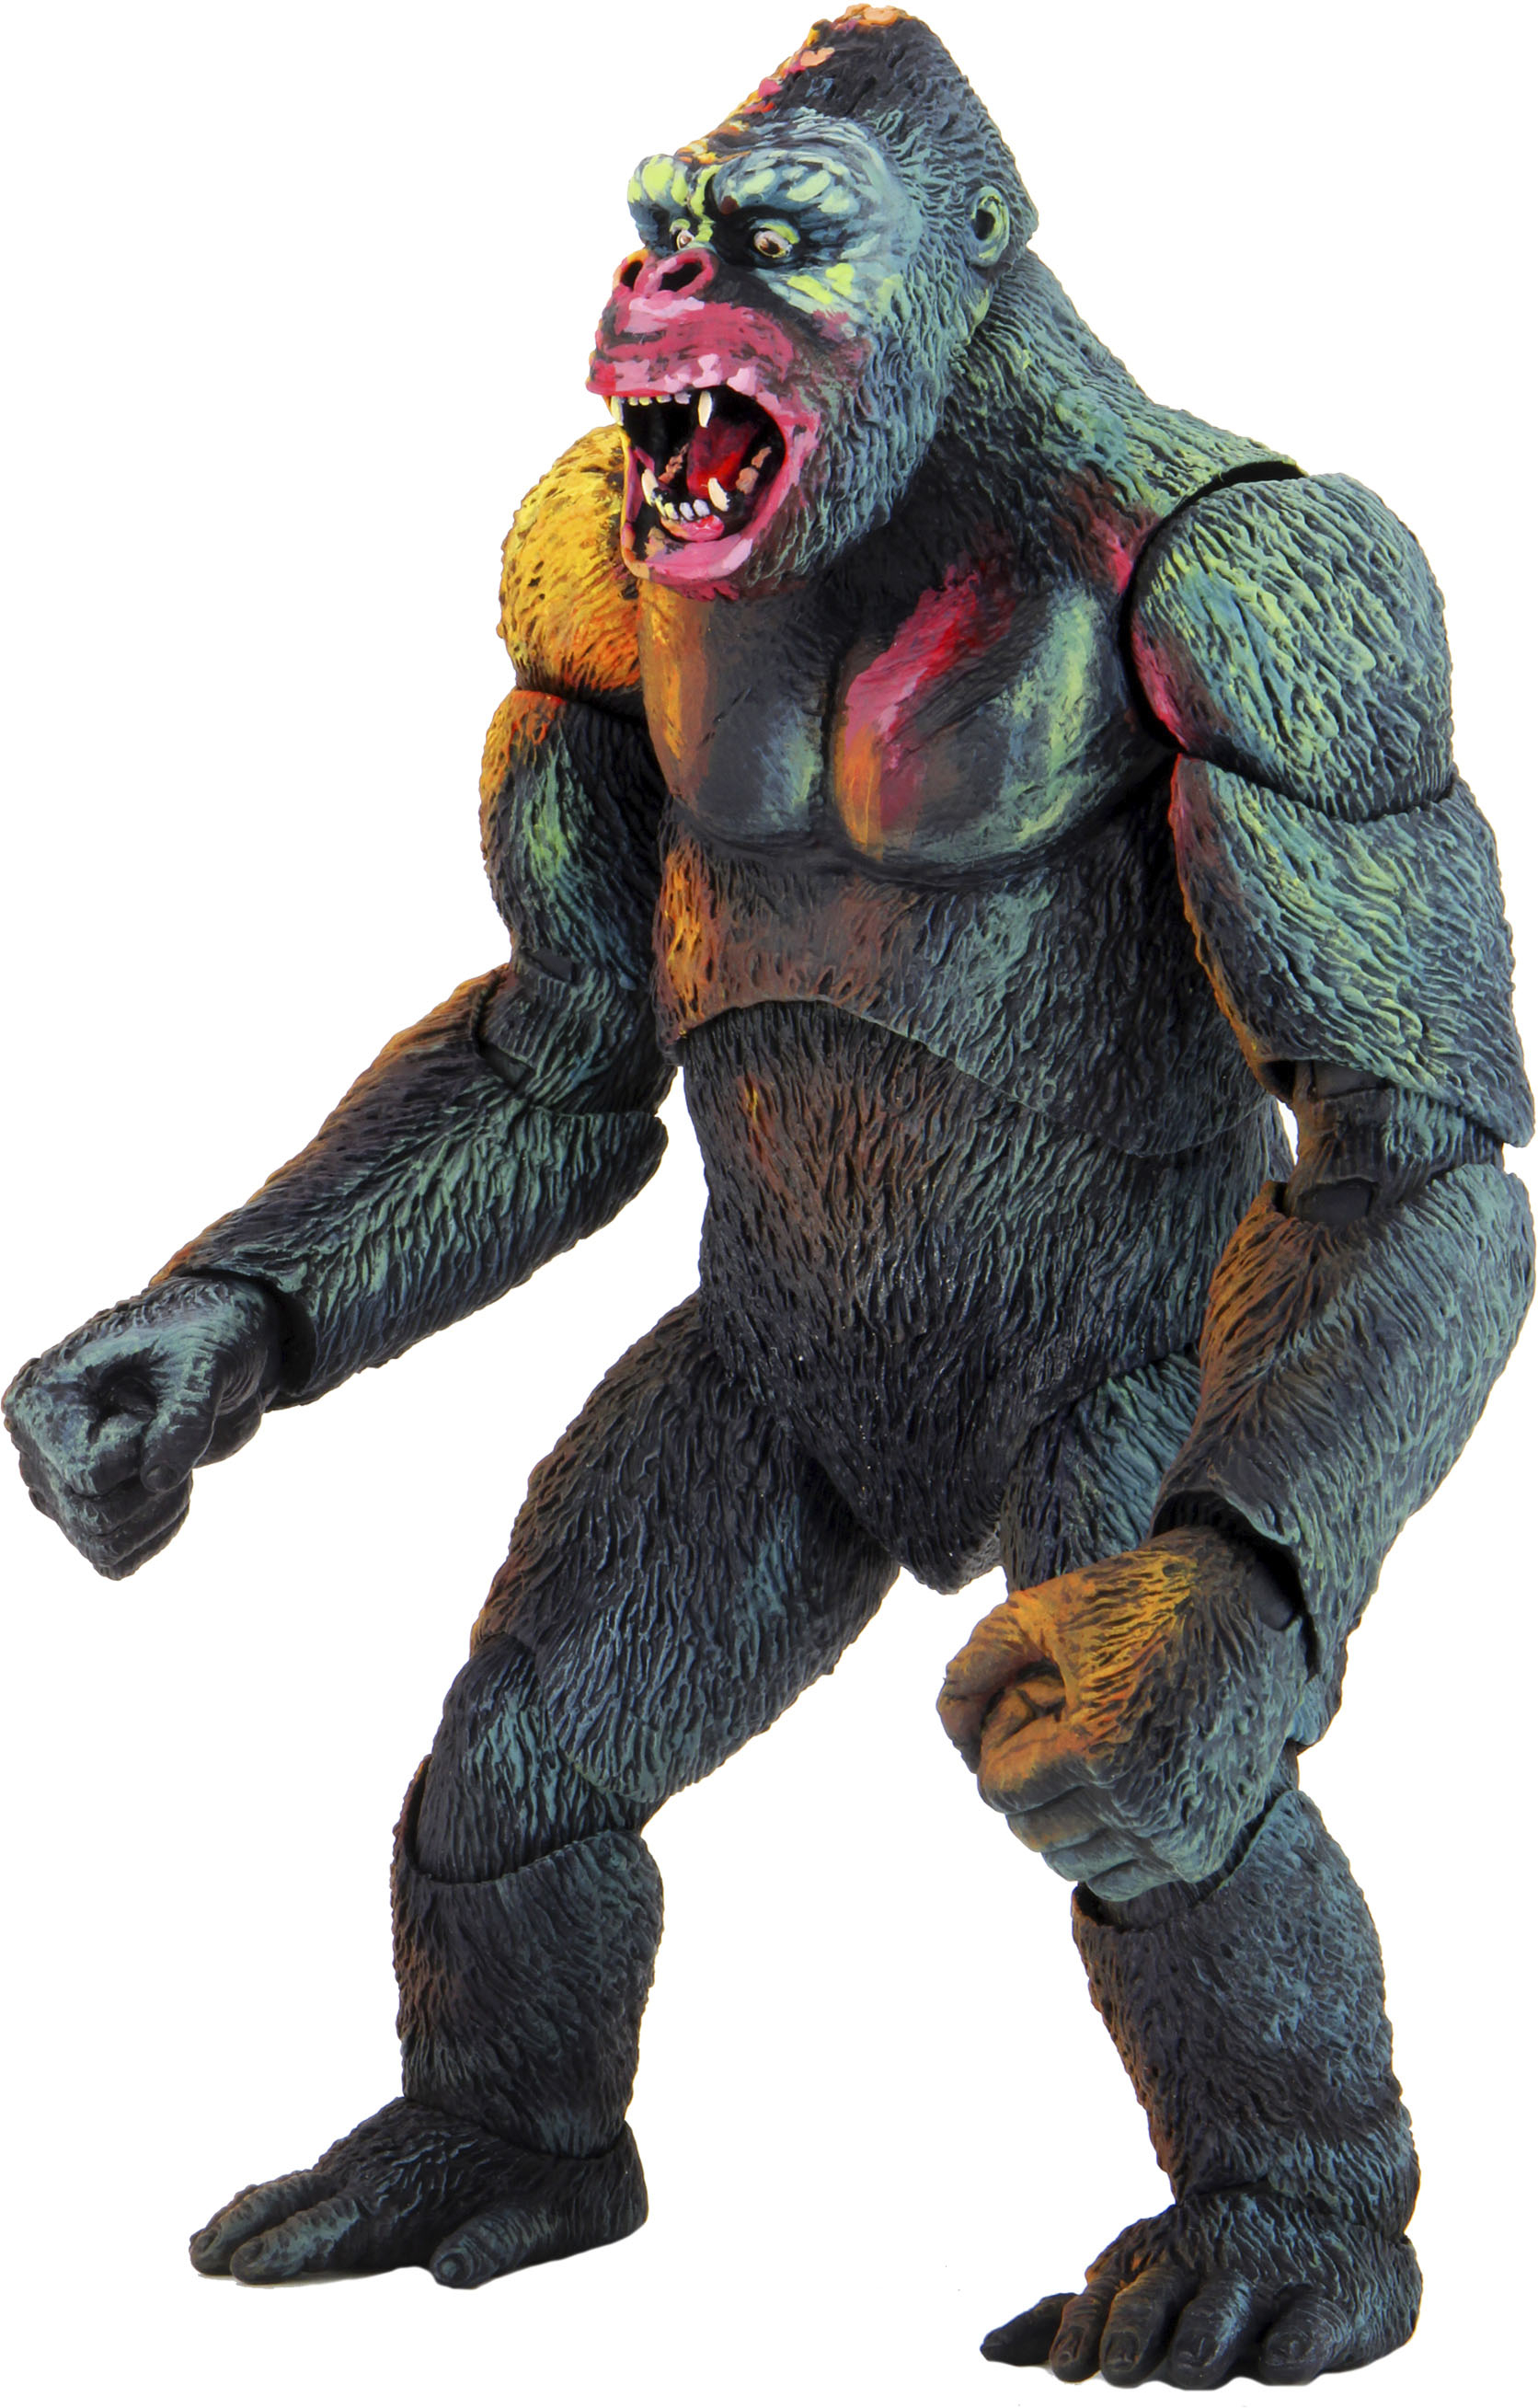 NECA - King Kong-7” Scale Action Figure – Ultimate King Kong (illustrated)